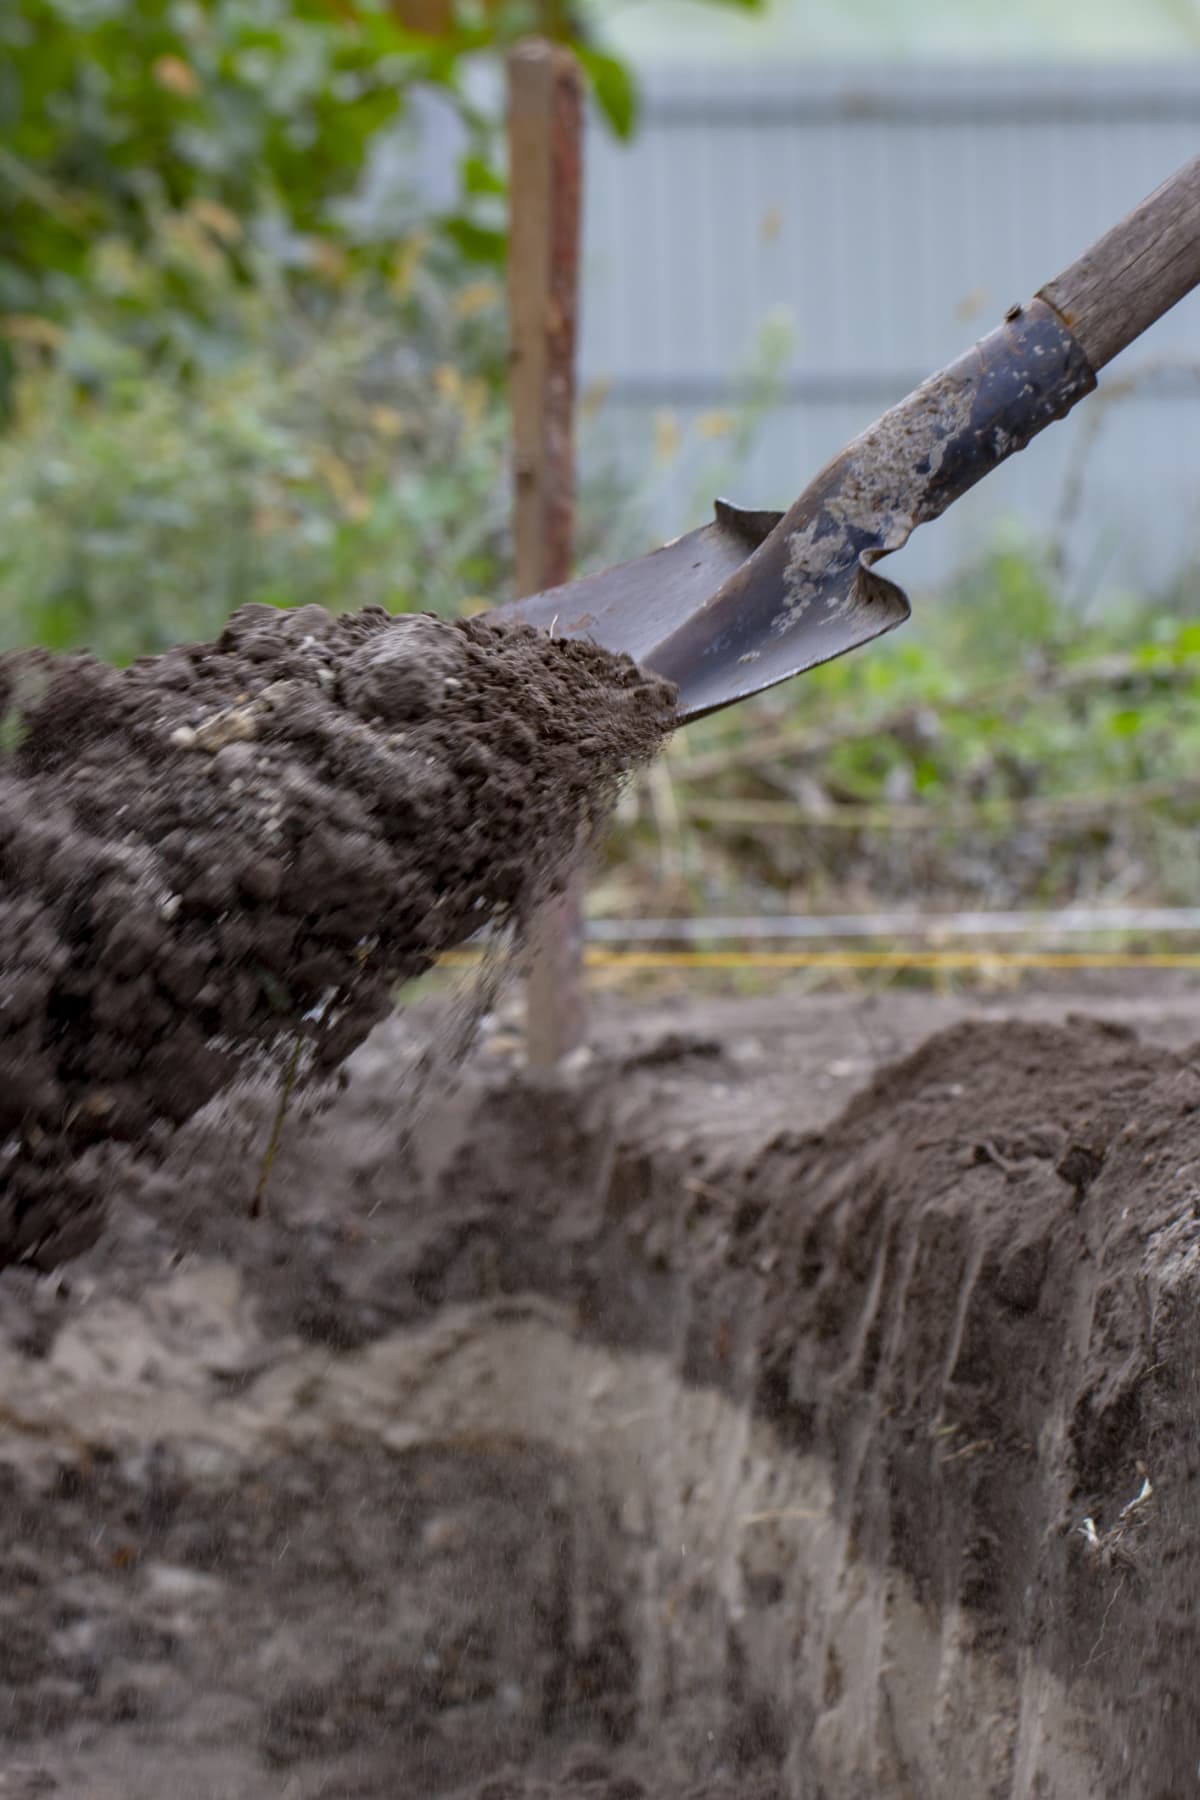 A person digging a hole in the ground with shovel